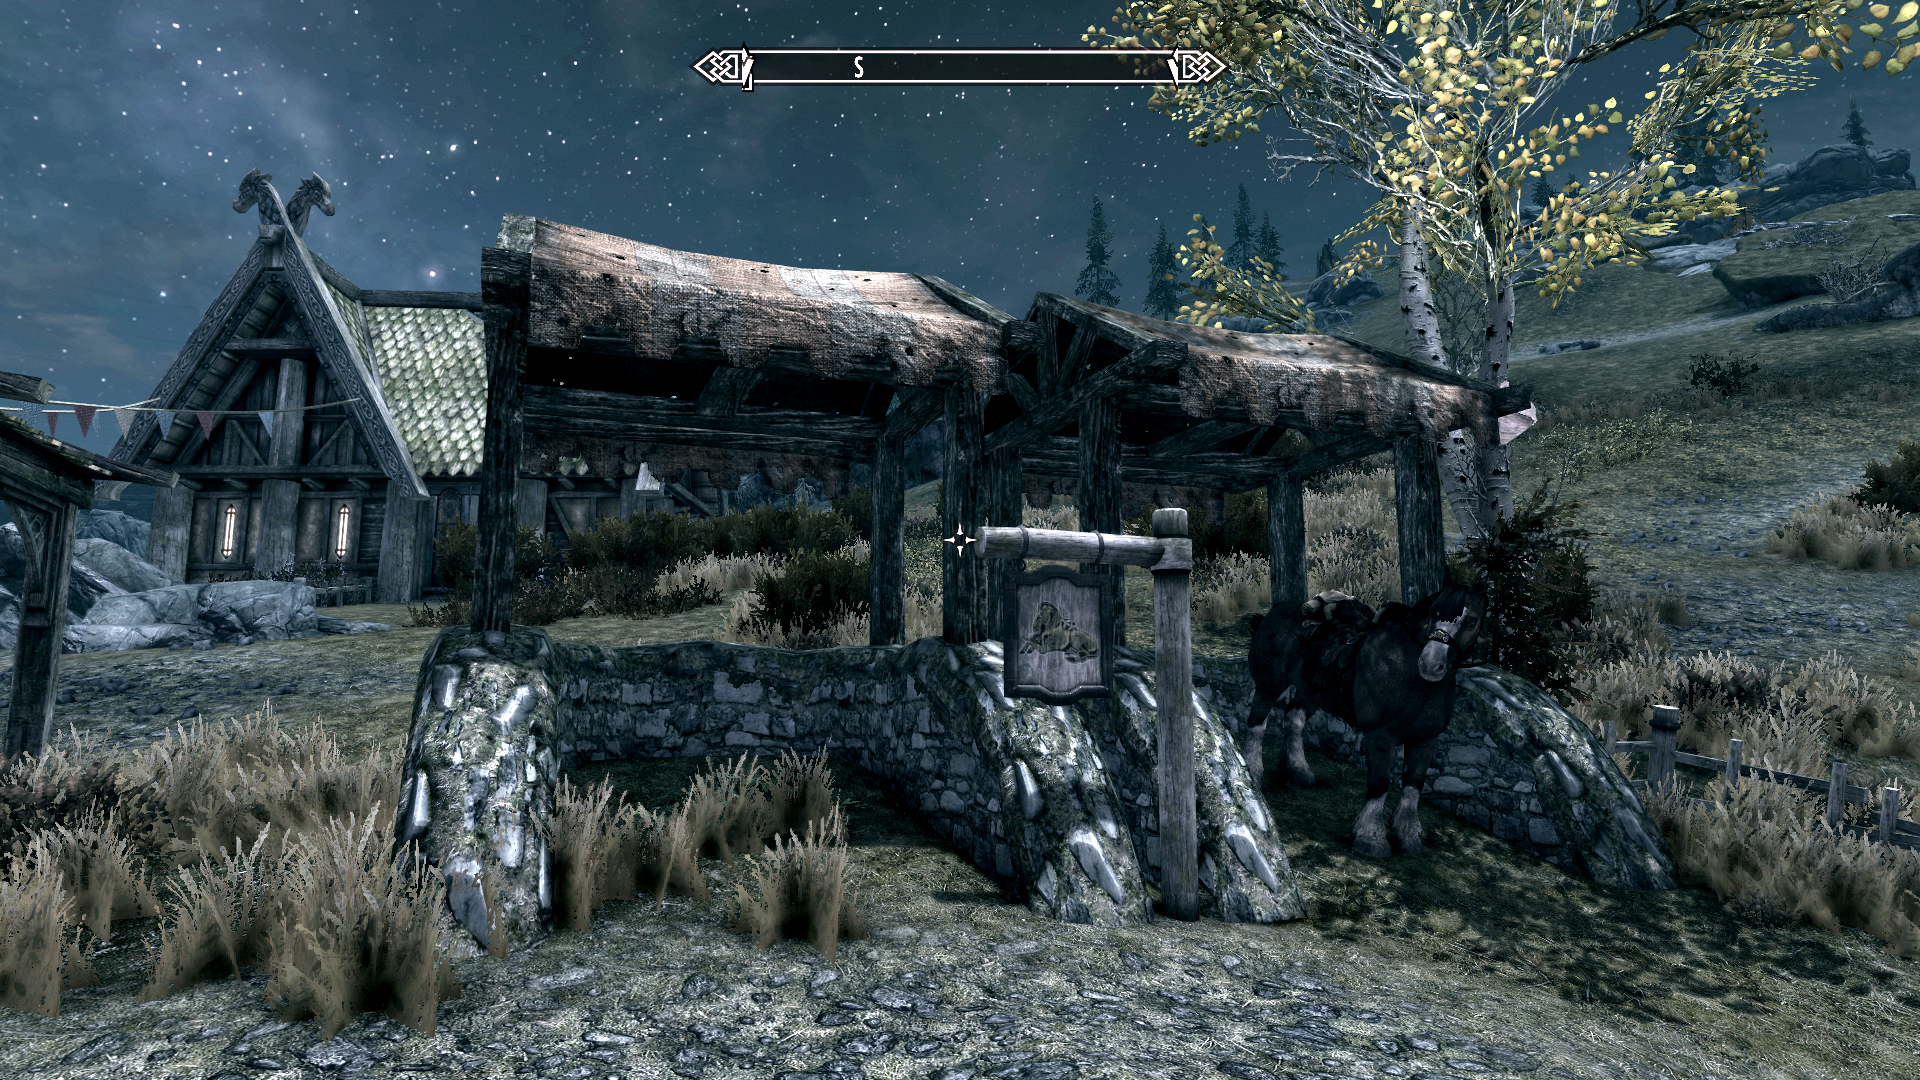 My Picks For Some Of The Coolest Skyrim HOUSING Mods Lans SoapBox.